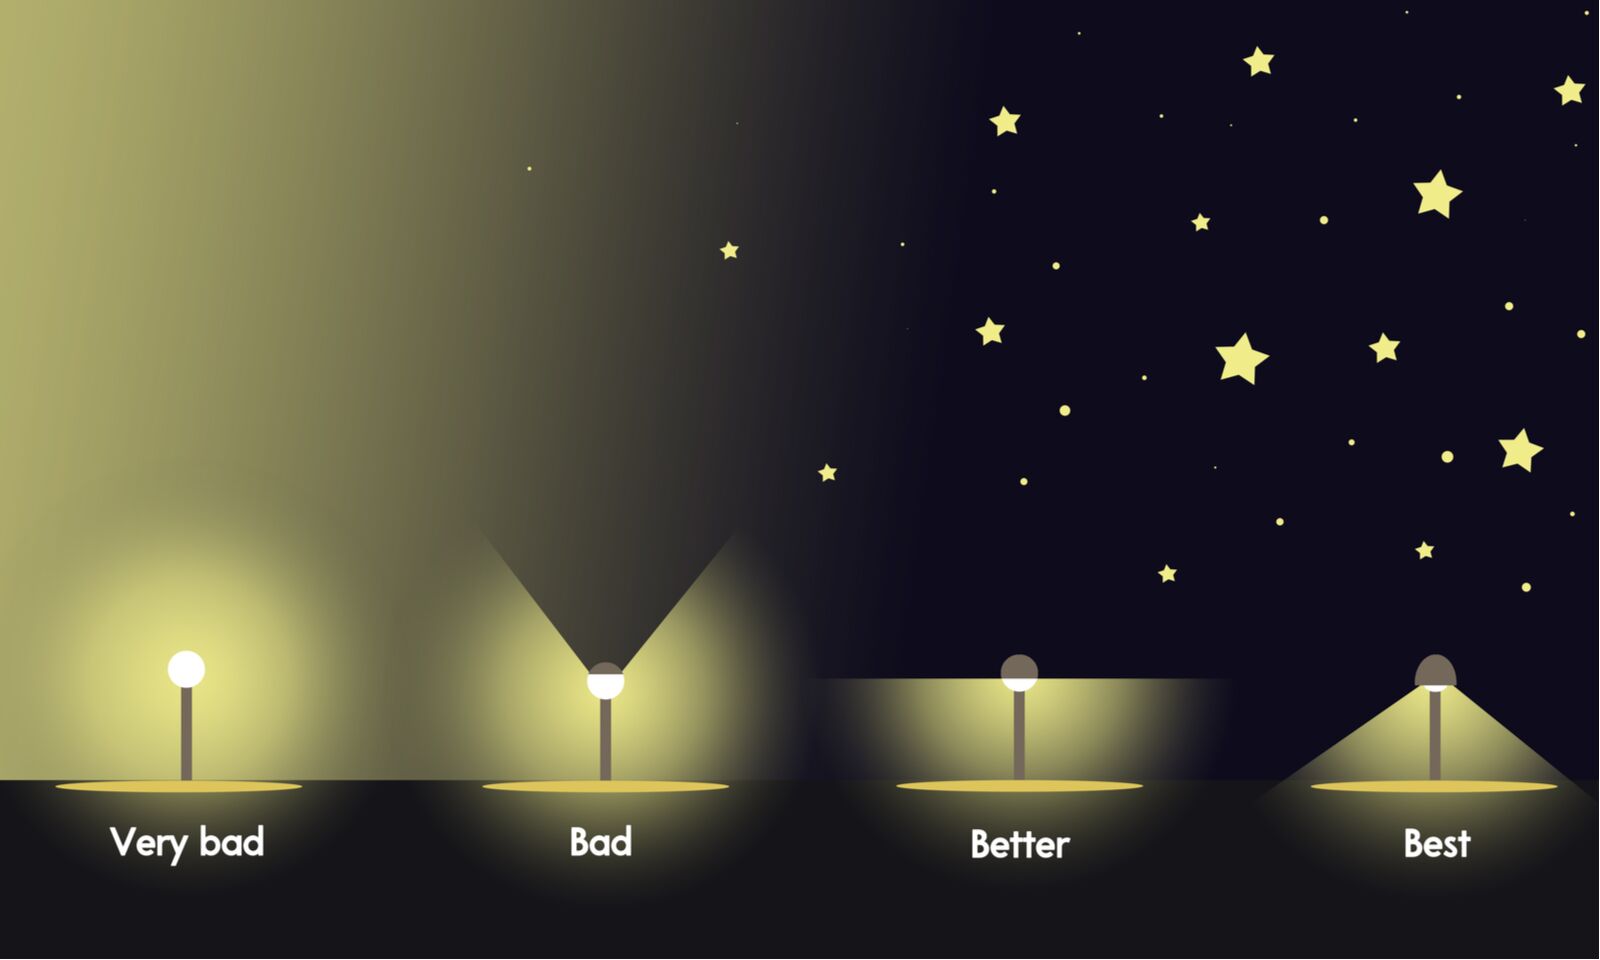 light pollution solution - how to target your lights